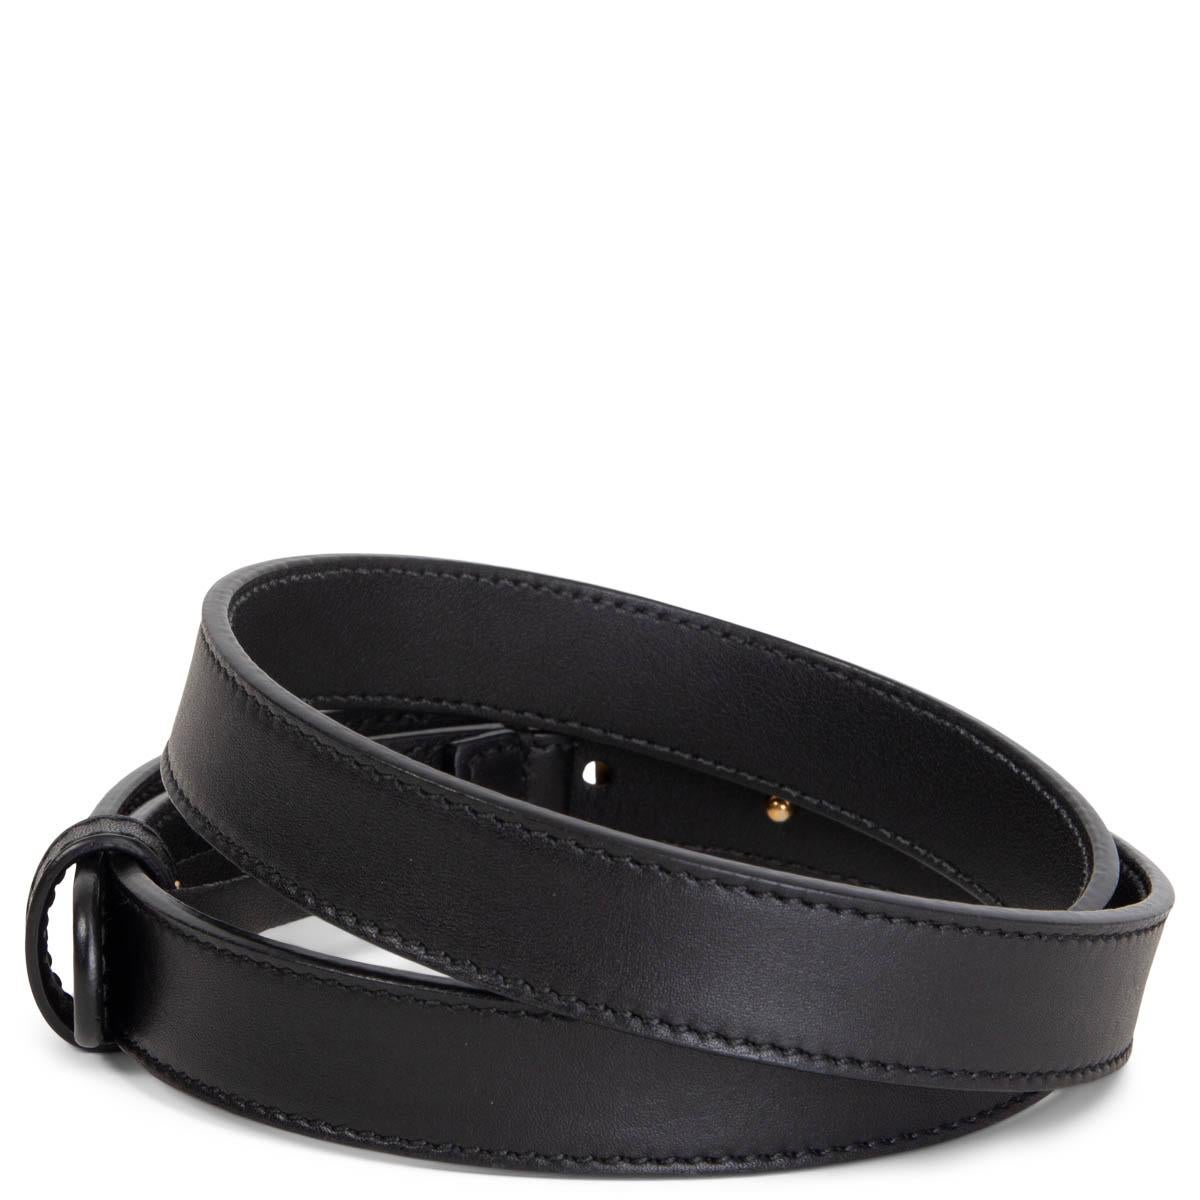 100% authentic Gucci GG Marmont Thin Belt in black leather and featuring and shiny gold-tone metal buckle. Has been worn and is in excellent condition. Comes with dust bag and box. 

Measurements
Tag Size	70
Size	70cm (27.3in)
Width	2cm